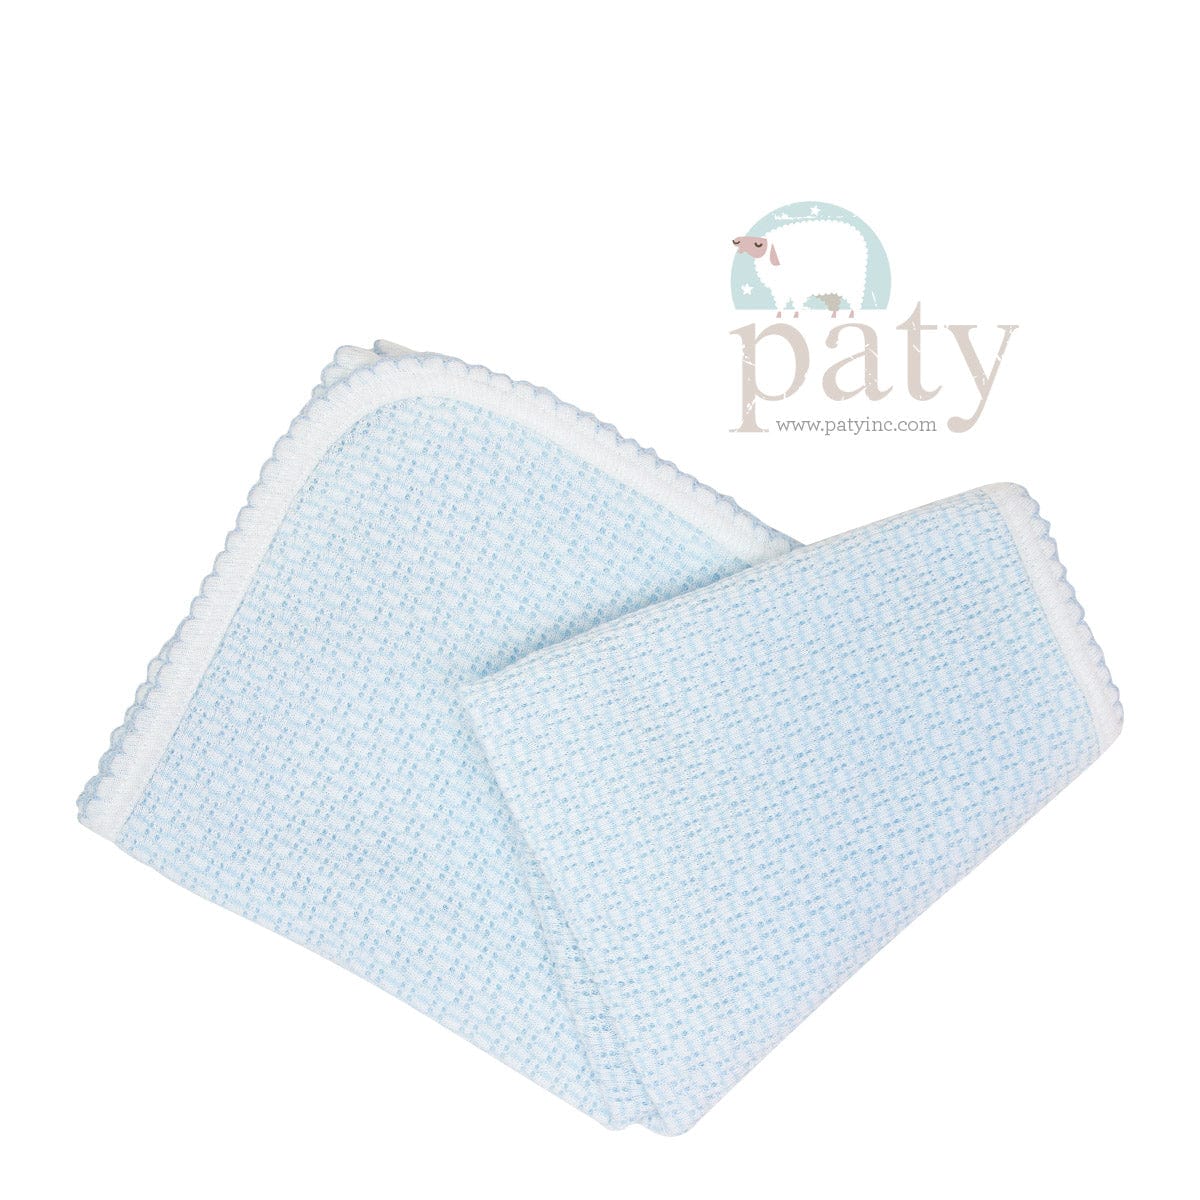 Paty, Inc. Paty Receiving Swaddle Blanket - Little Miss Muffin Children & Home